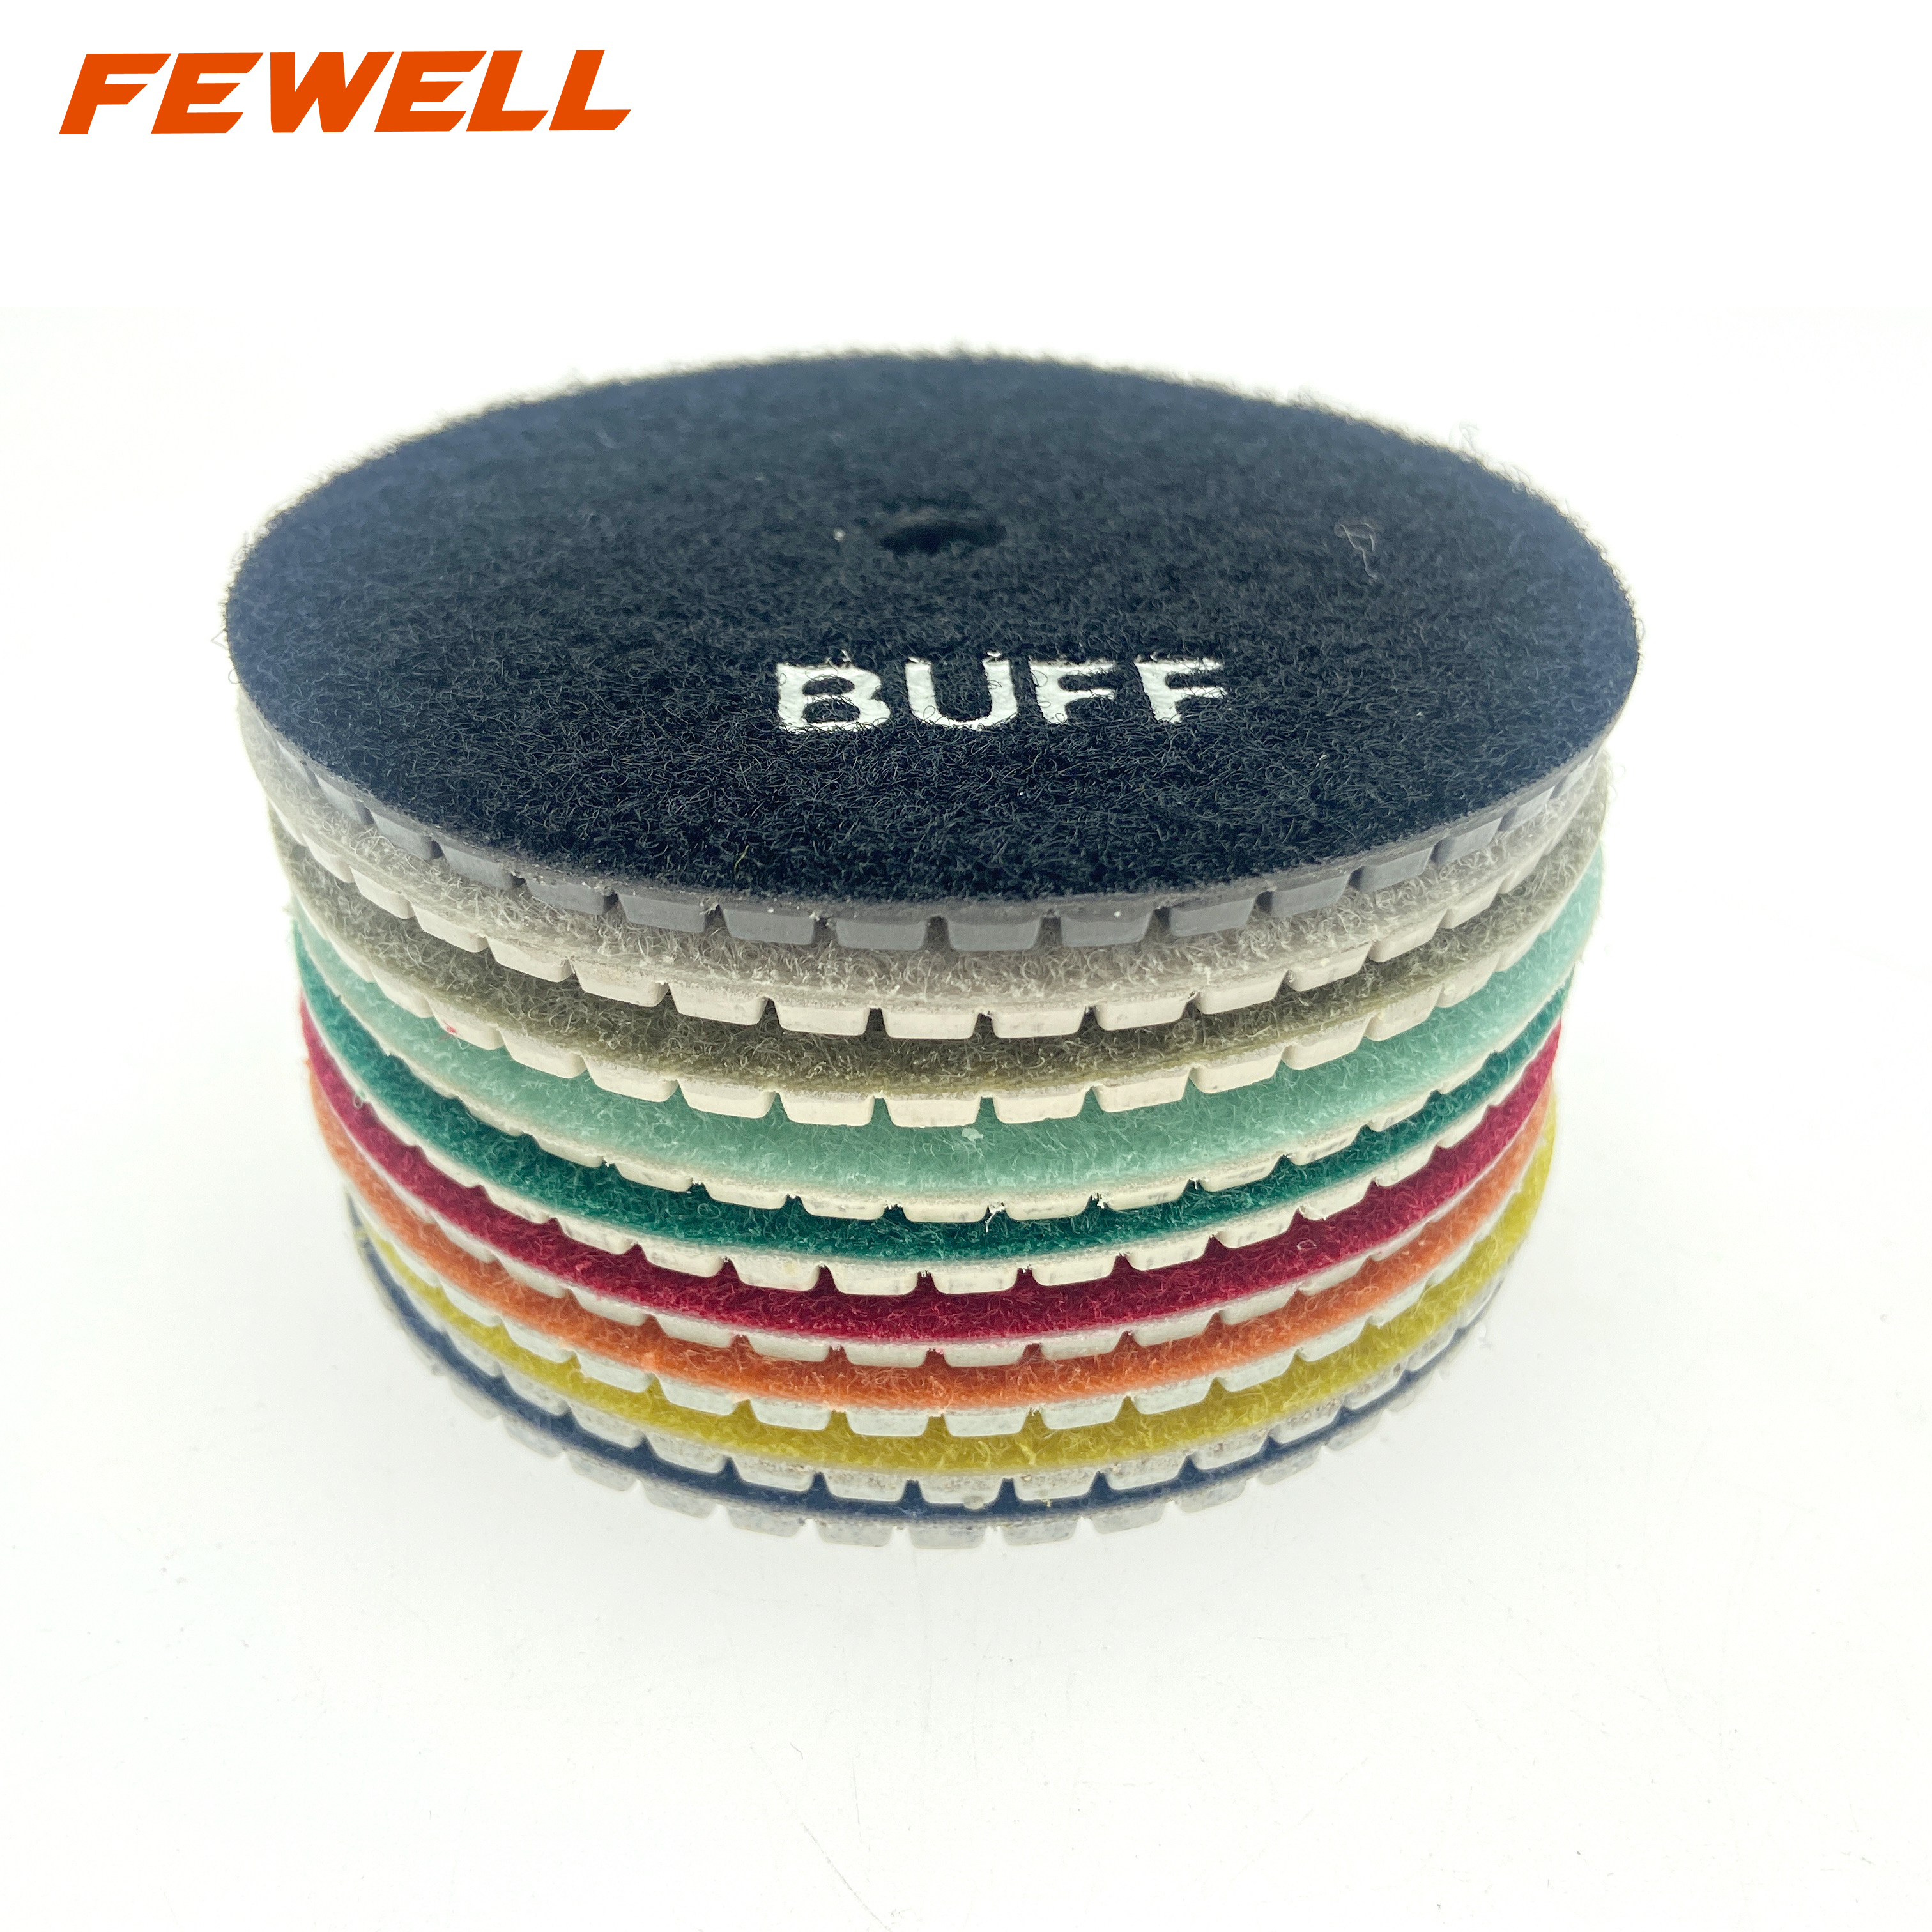 Top quality 4inch 100mm Diamond Dry Grinding Abrasive Pads 9 PCS Sets for Polishing Ceramic Tiles Granite Marble Concrete